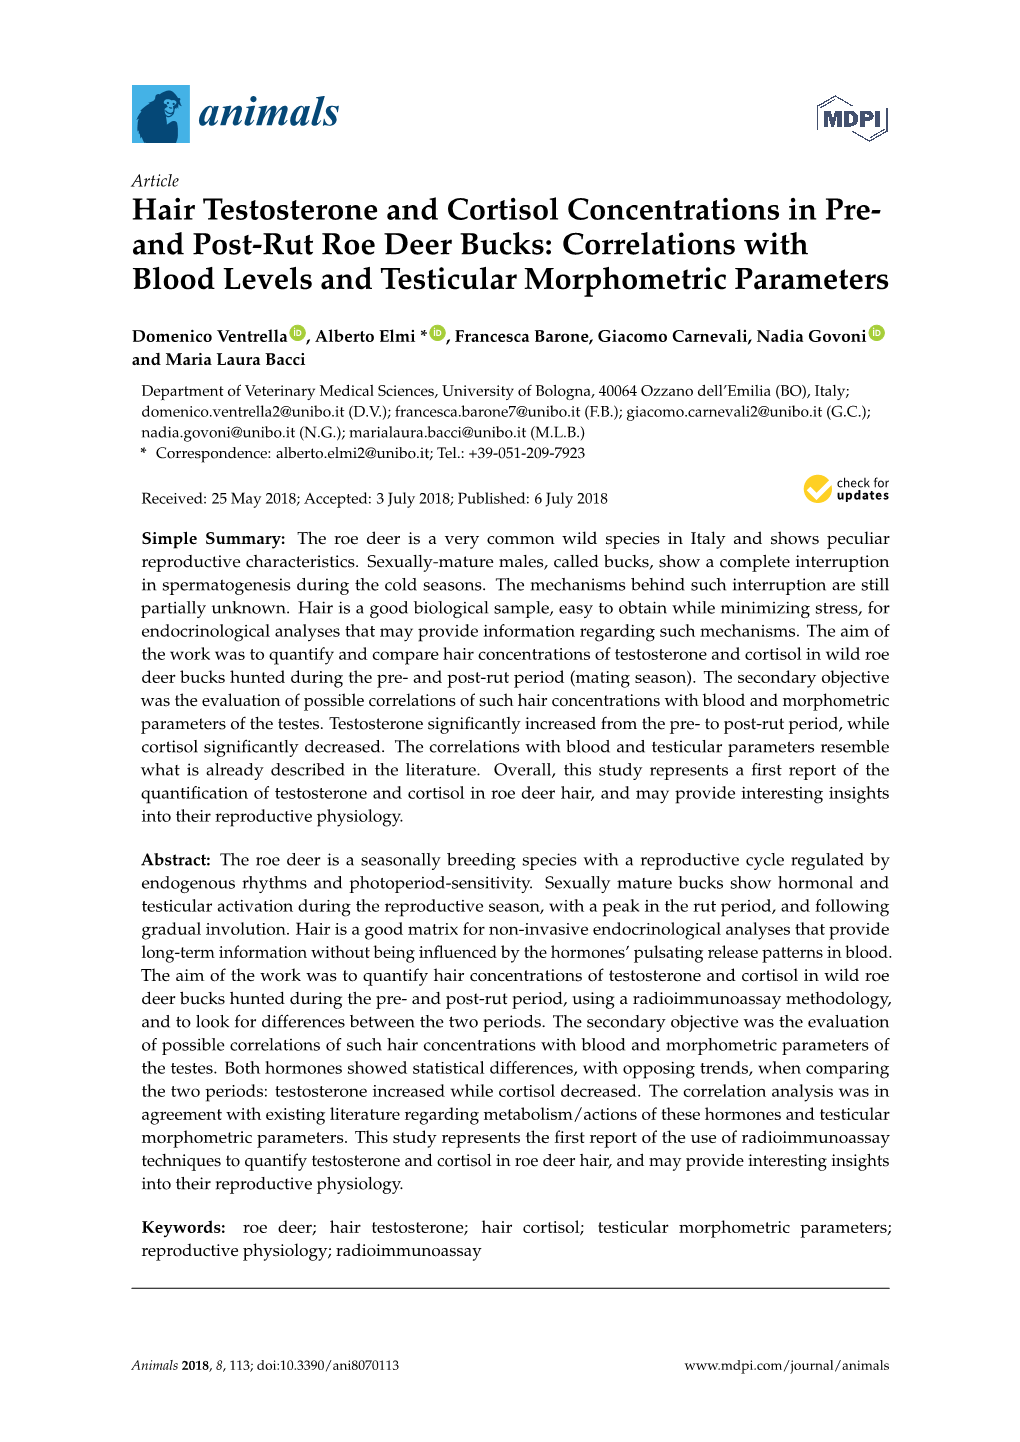 Hair Testosterone and Cortisol Concentrations in Pre- and Post-Rut Roe Deer Bucks: Correlations with Blood Levels and Testicular Morphometric Parameters